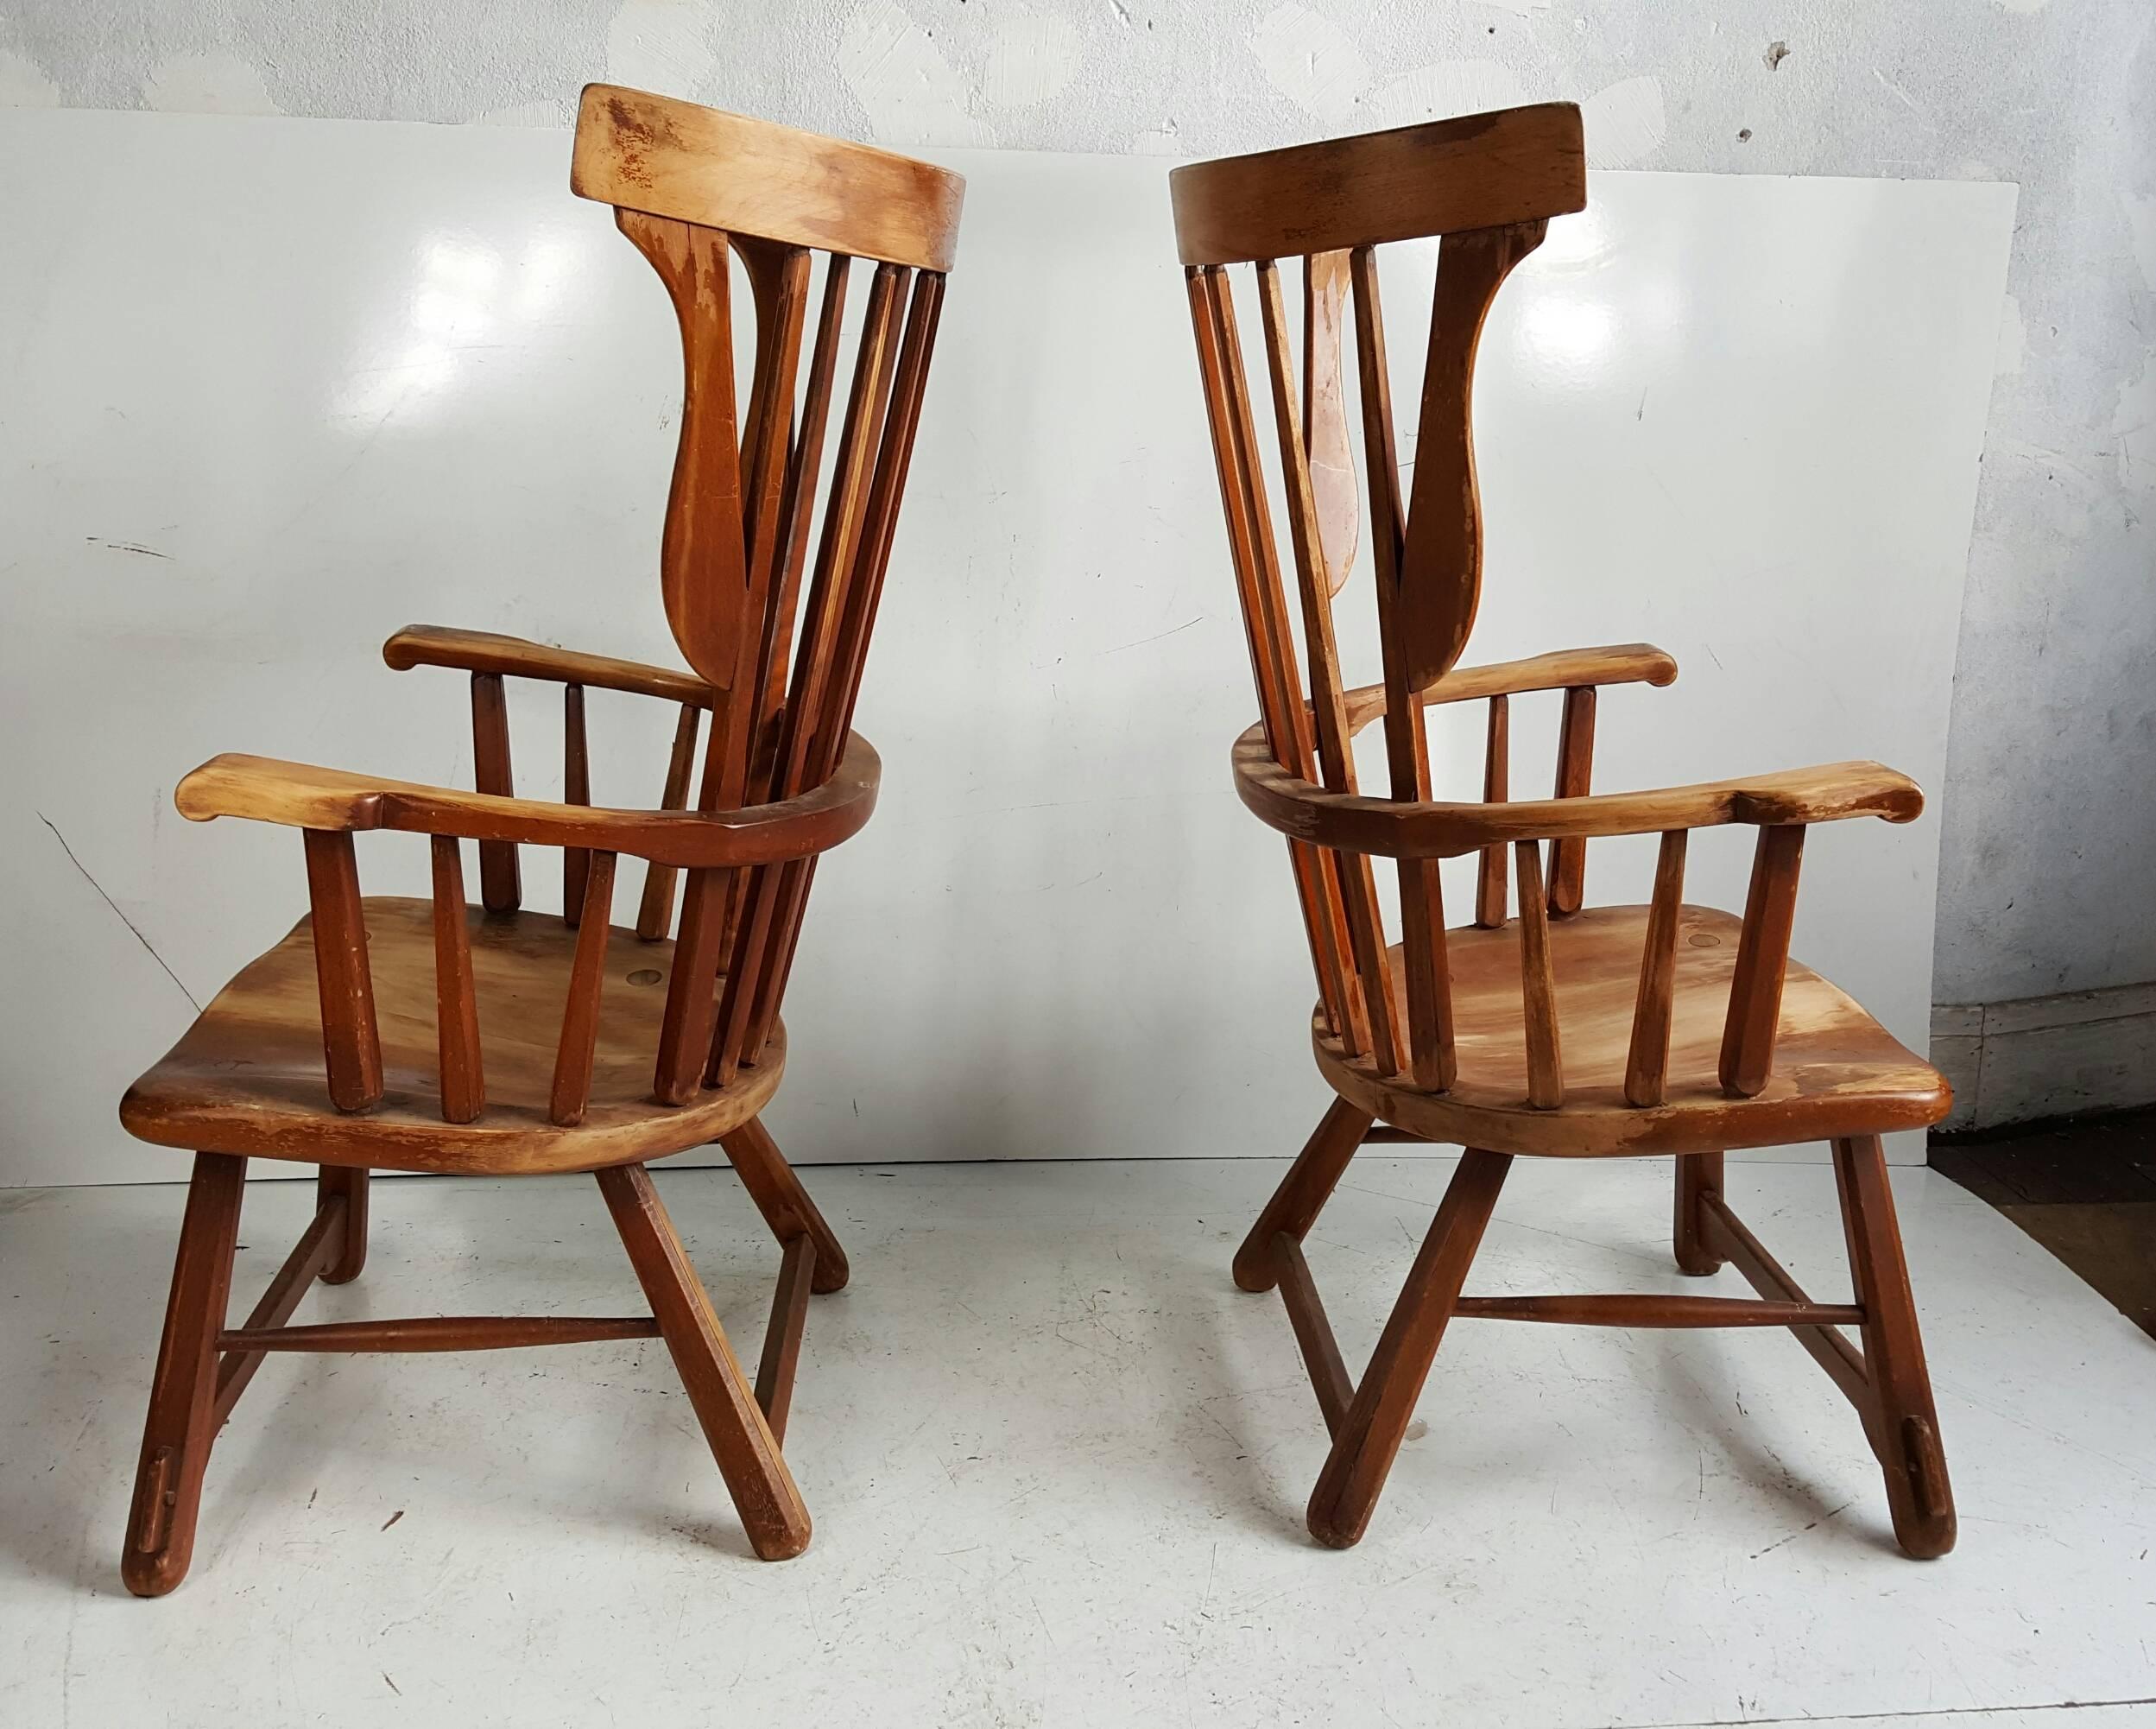 Pair oversized Crafts Colonial arm chairs,, Solid maple wood construction,,Almost cartoon-like proportions,,Interesting mortis and tenen construction.Extremely comfortable.